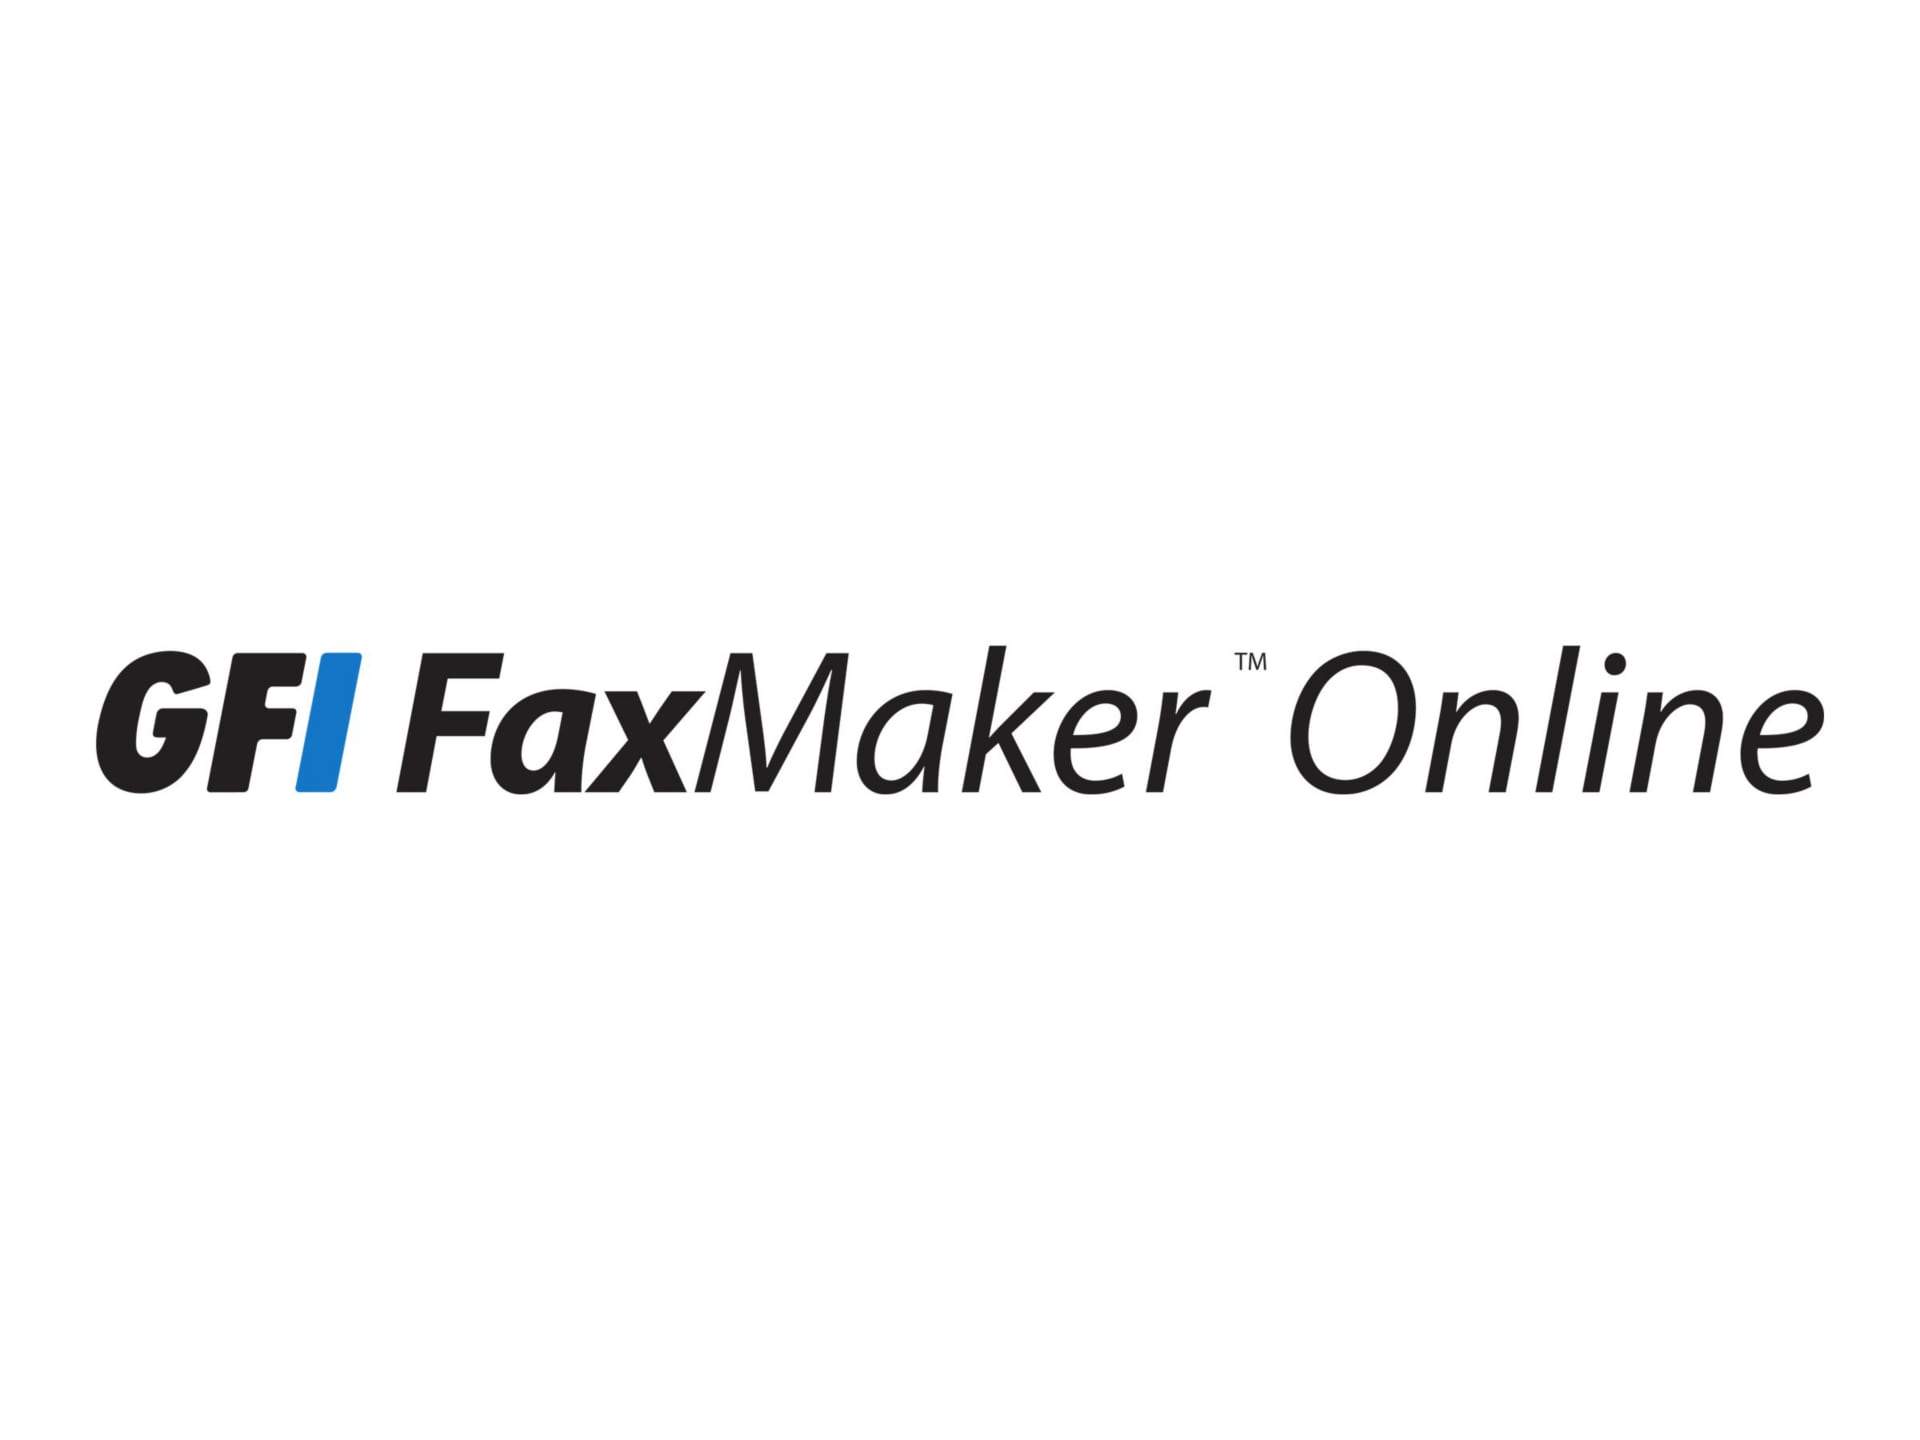 GFI FAXmaker Online fax services - subscription license (1 year) - 6000 fax